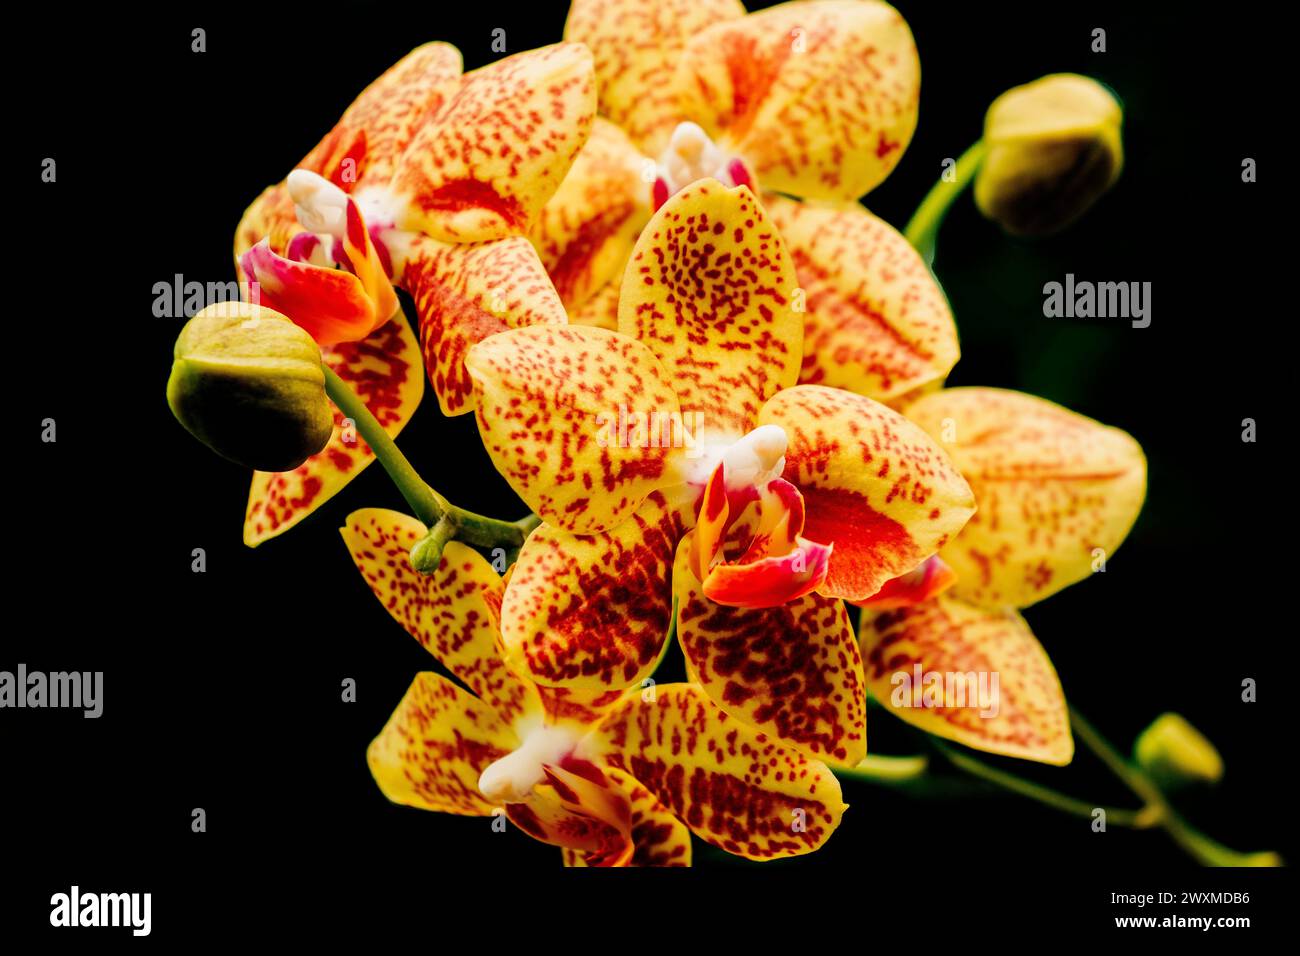 Red and yellow orchid flower on black background Stock Photo